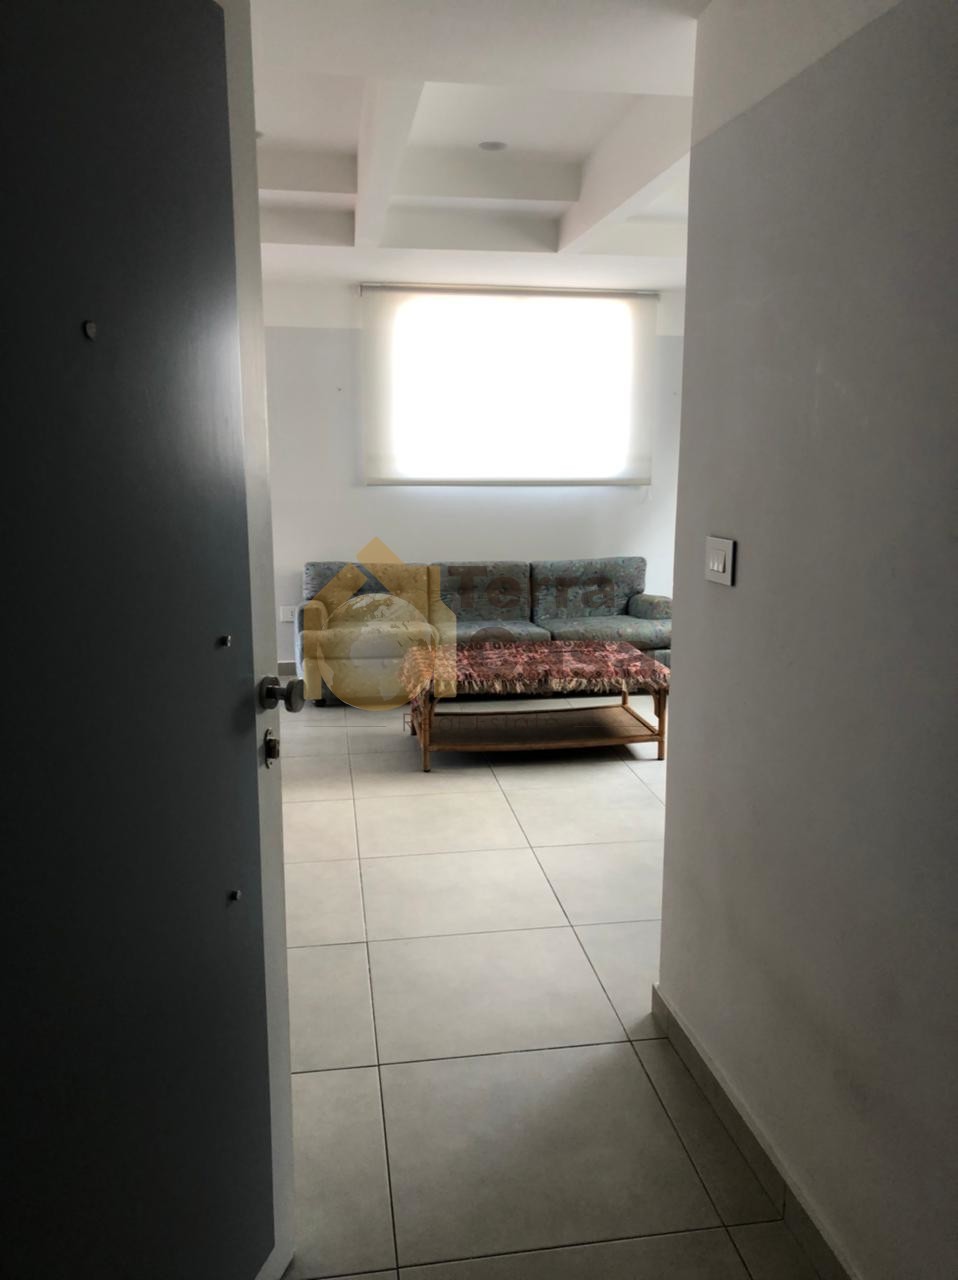 Sassine fully furnished apartment terrace 120 sqm cash payment.